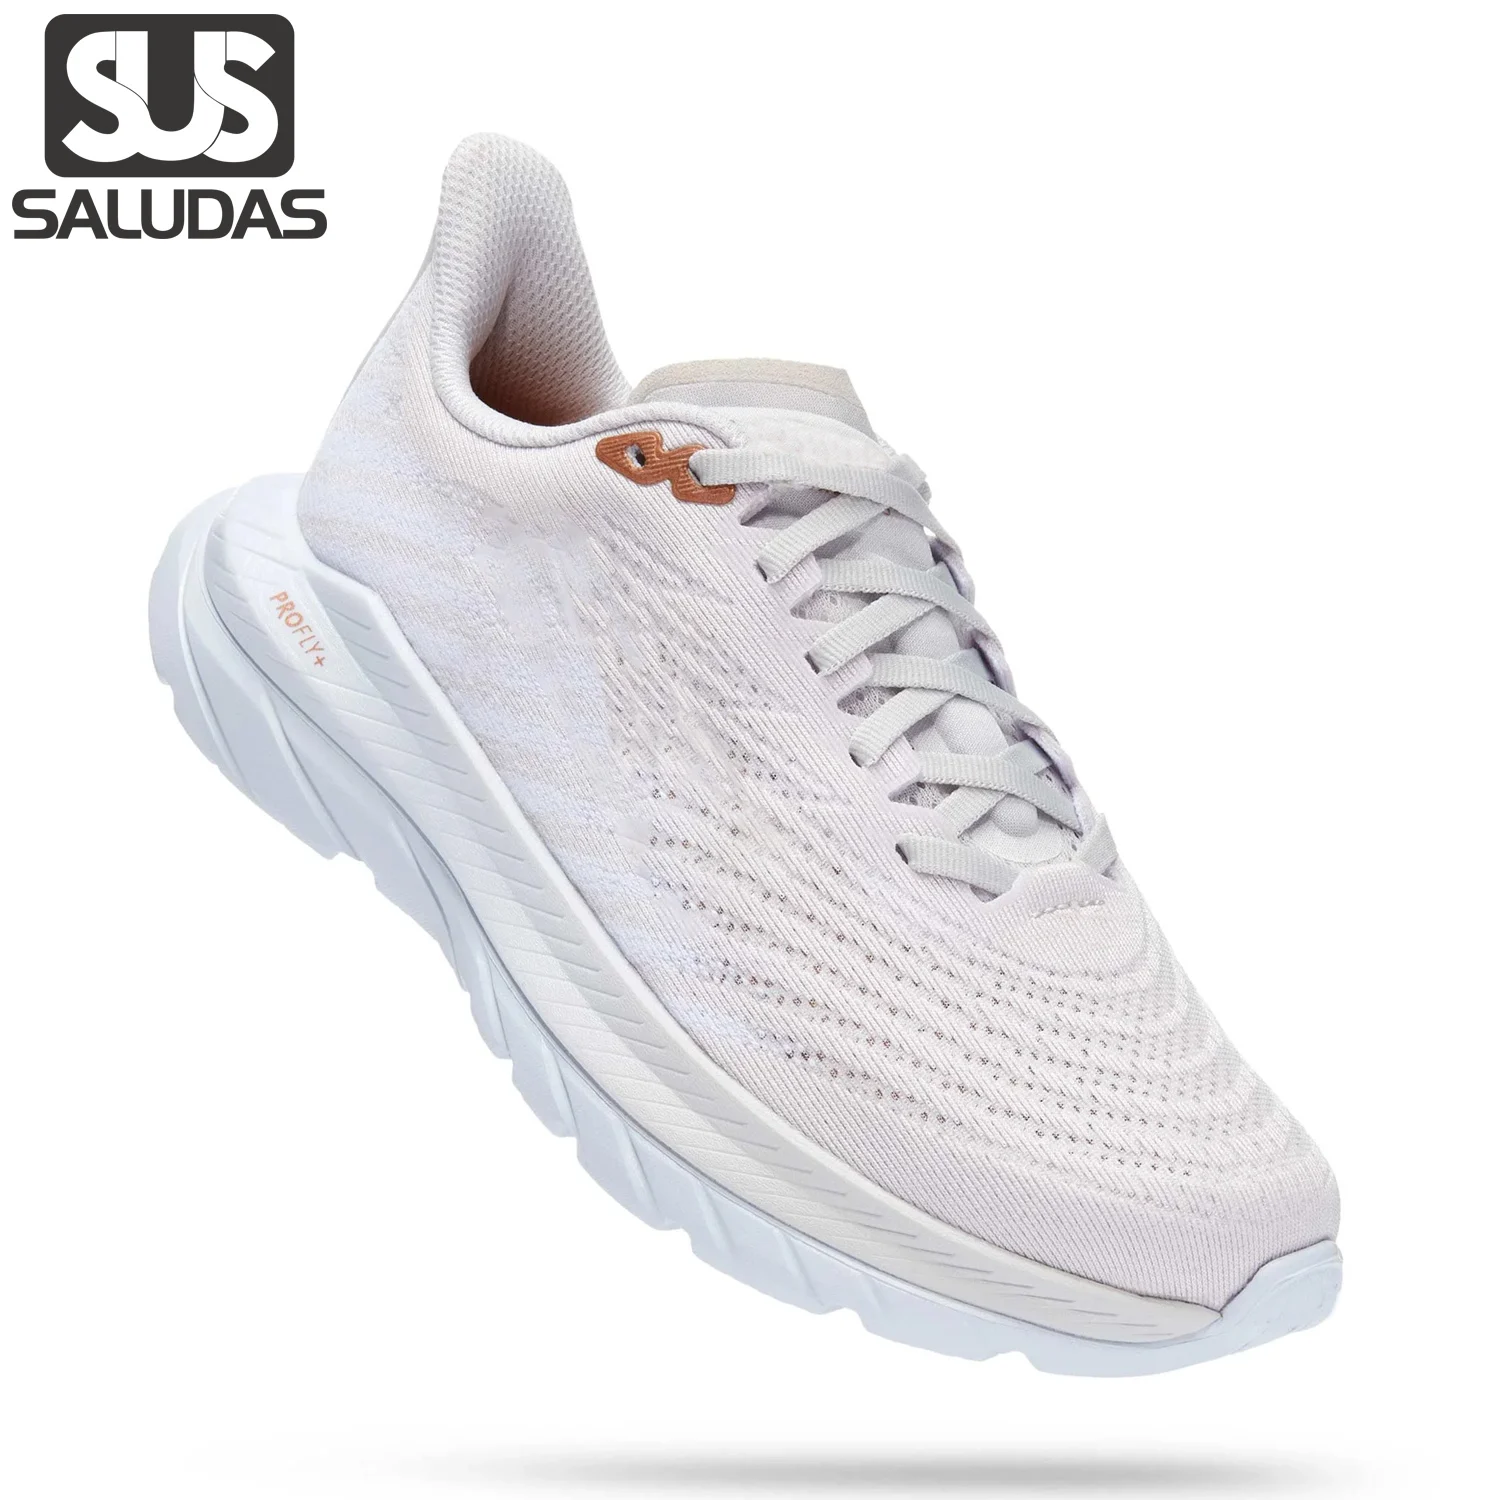 

SALUDAS Mach 5 Men Running Shoes Stretch Cushioning Outdoor Marathon Running Sneakers Breathable Casual Tennis Sneakers for Men